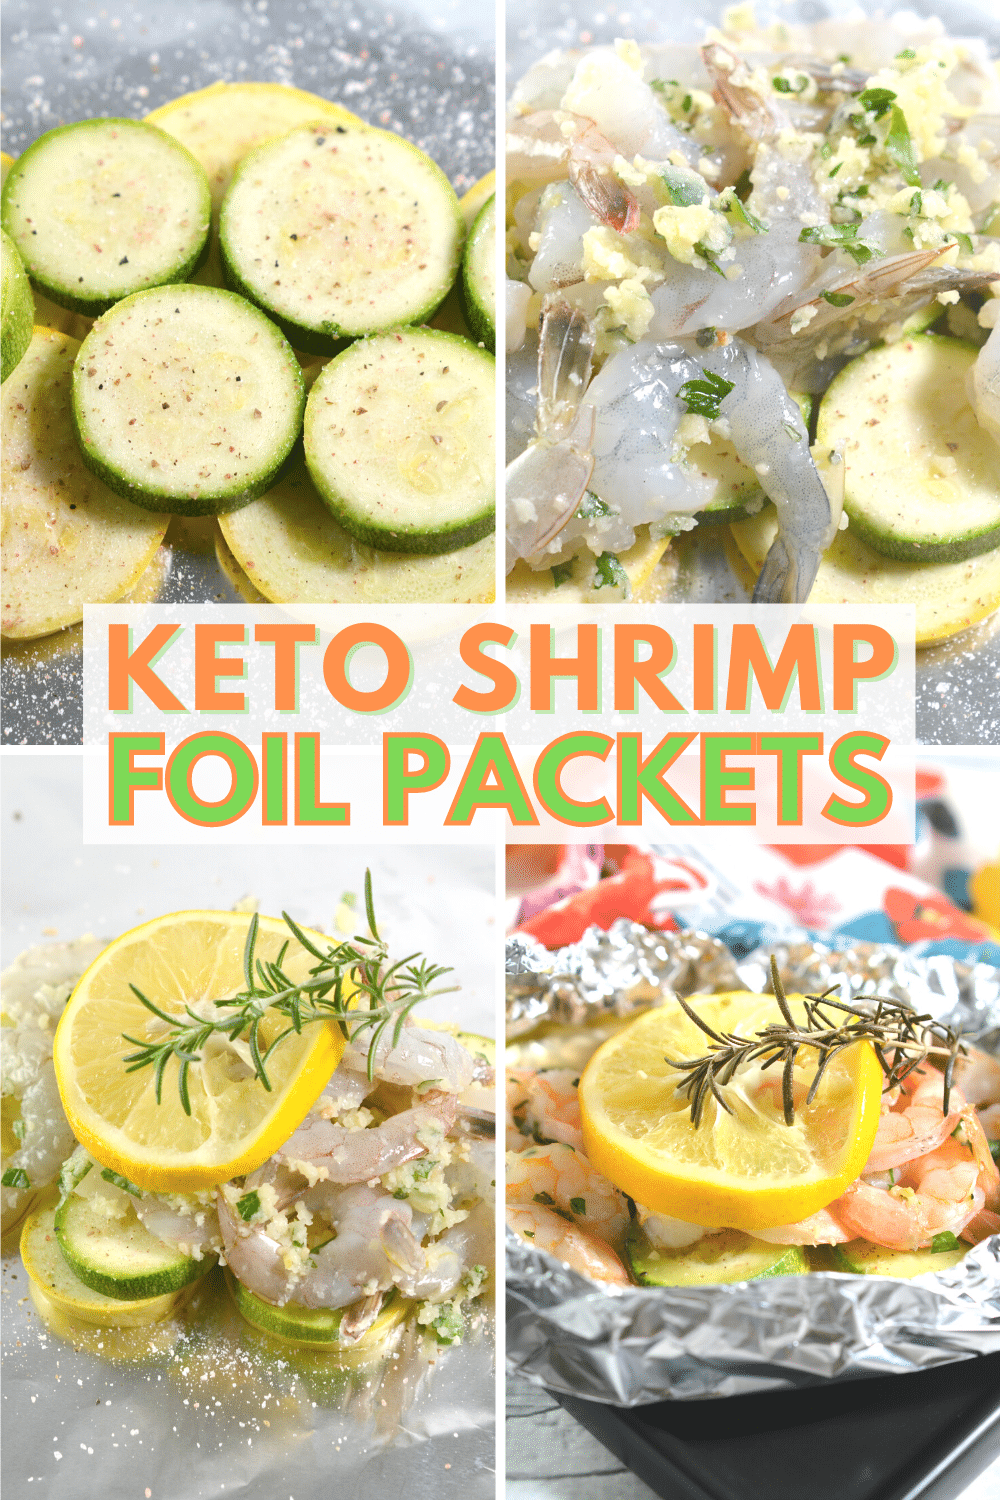 Keto Shrimp Foil Packets are a quick and easy way to get a healthy dinner on the table. This keto friendly meal is family friendly and mess free! #shrimp #foilpackets #keto via @wondermomwannab